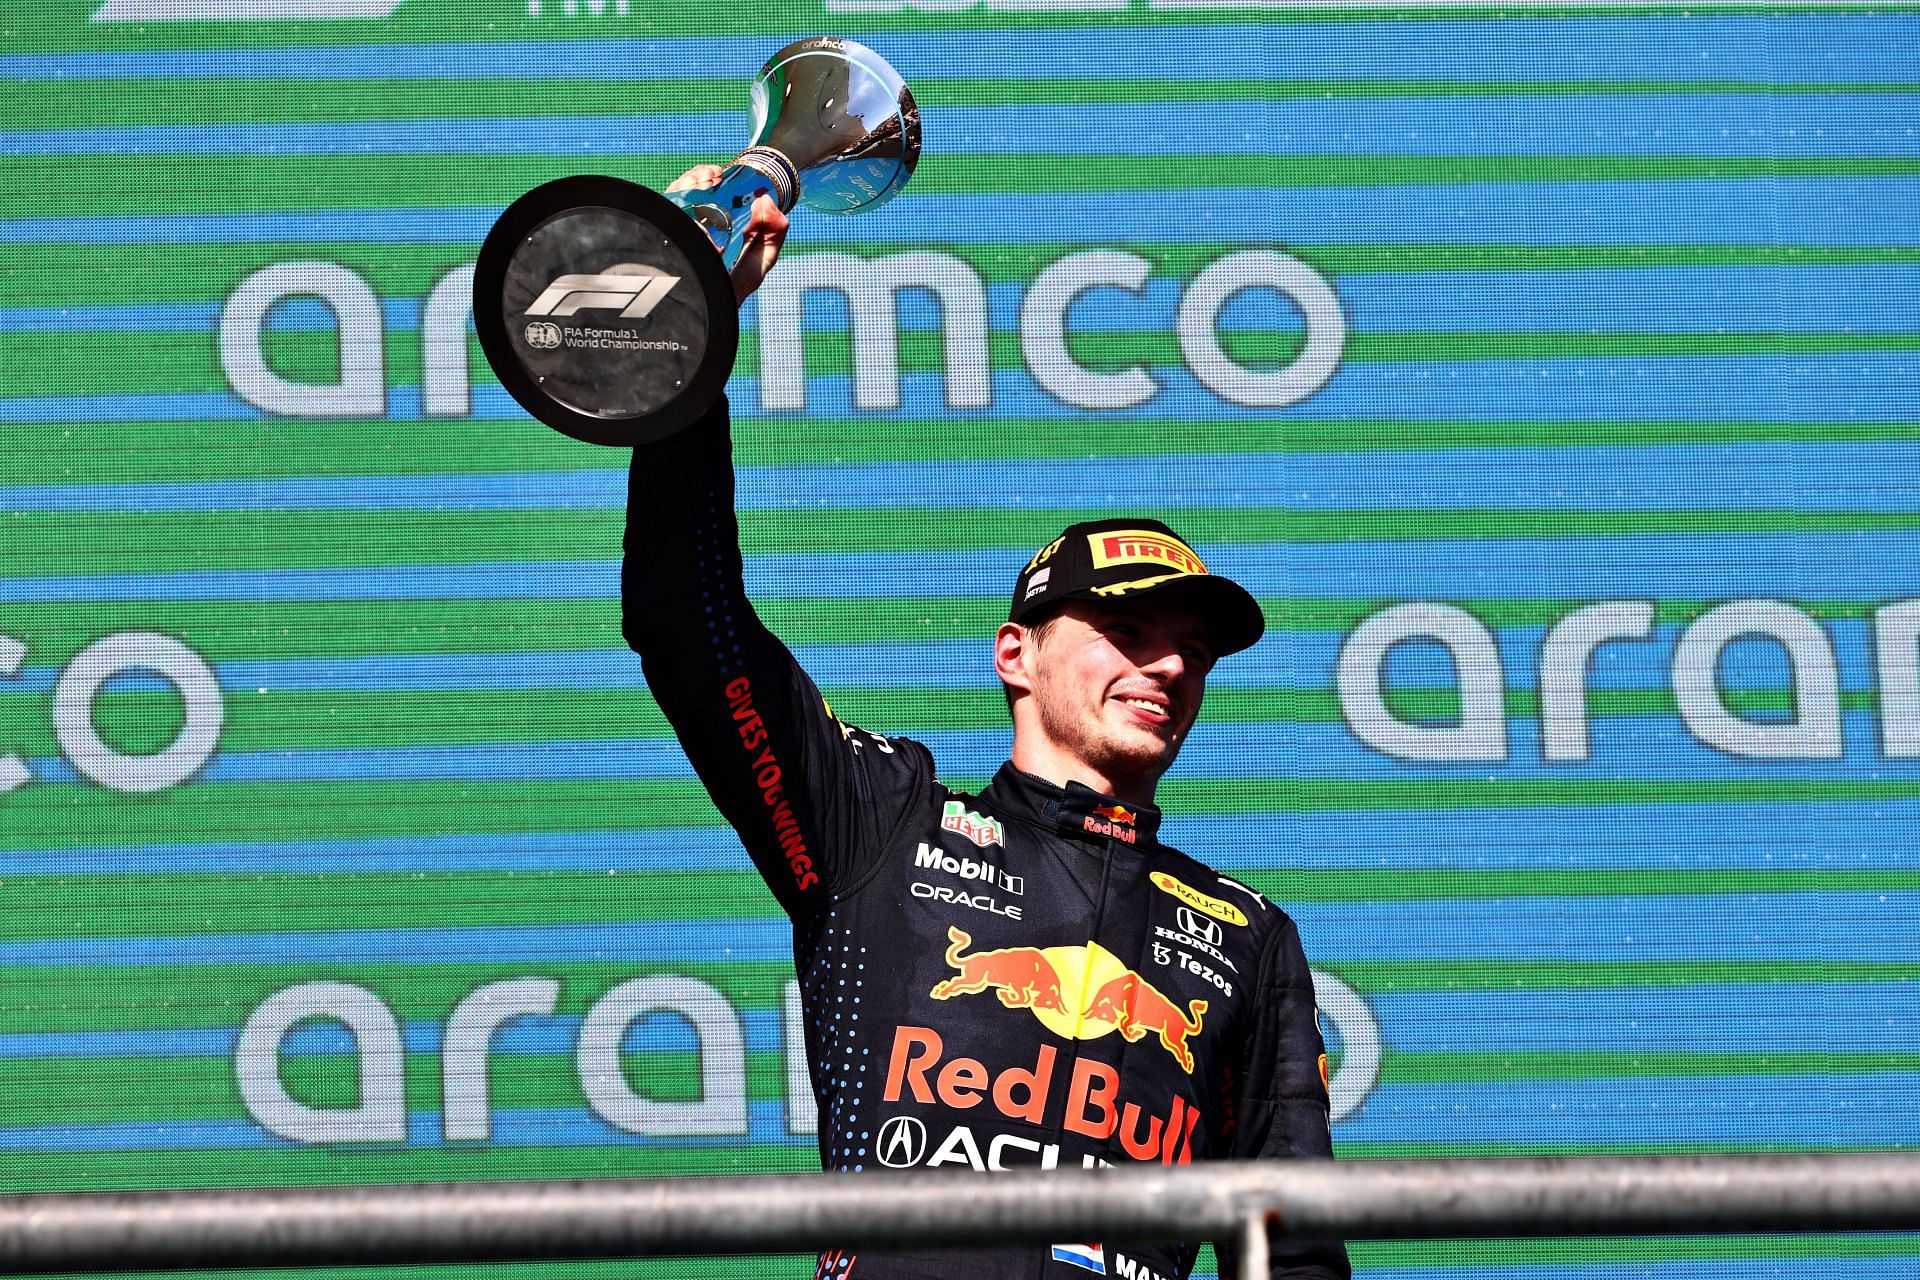 Max Verstappen doubled his championship lead by winning the USGP. Photo: Mark Thompson/Getty Images.